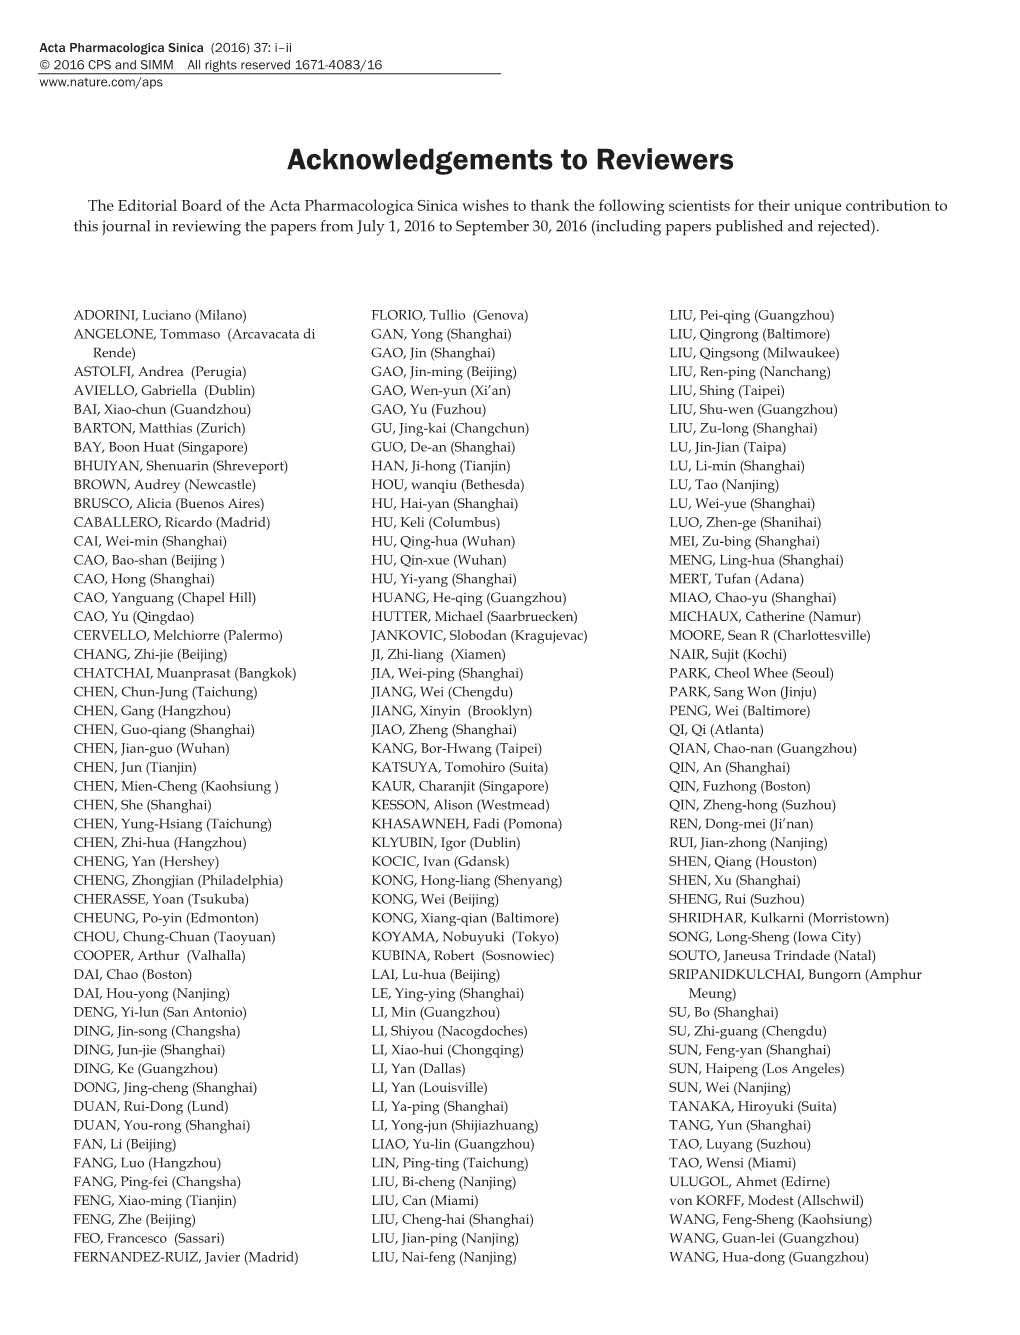 Acknowledgements to Reviewers